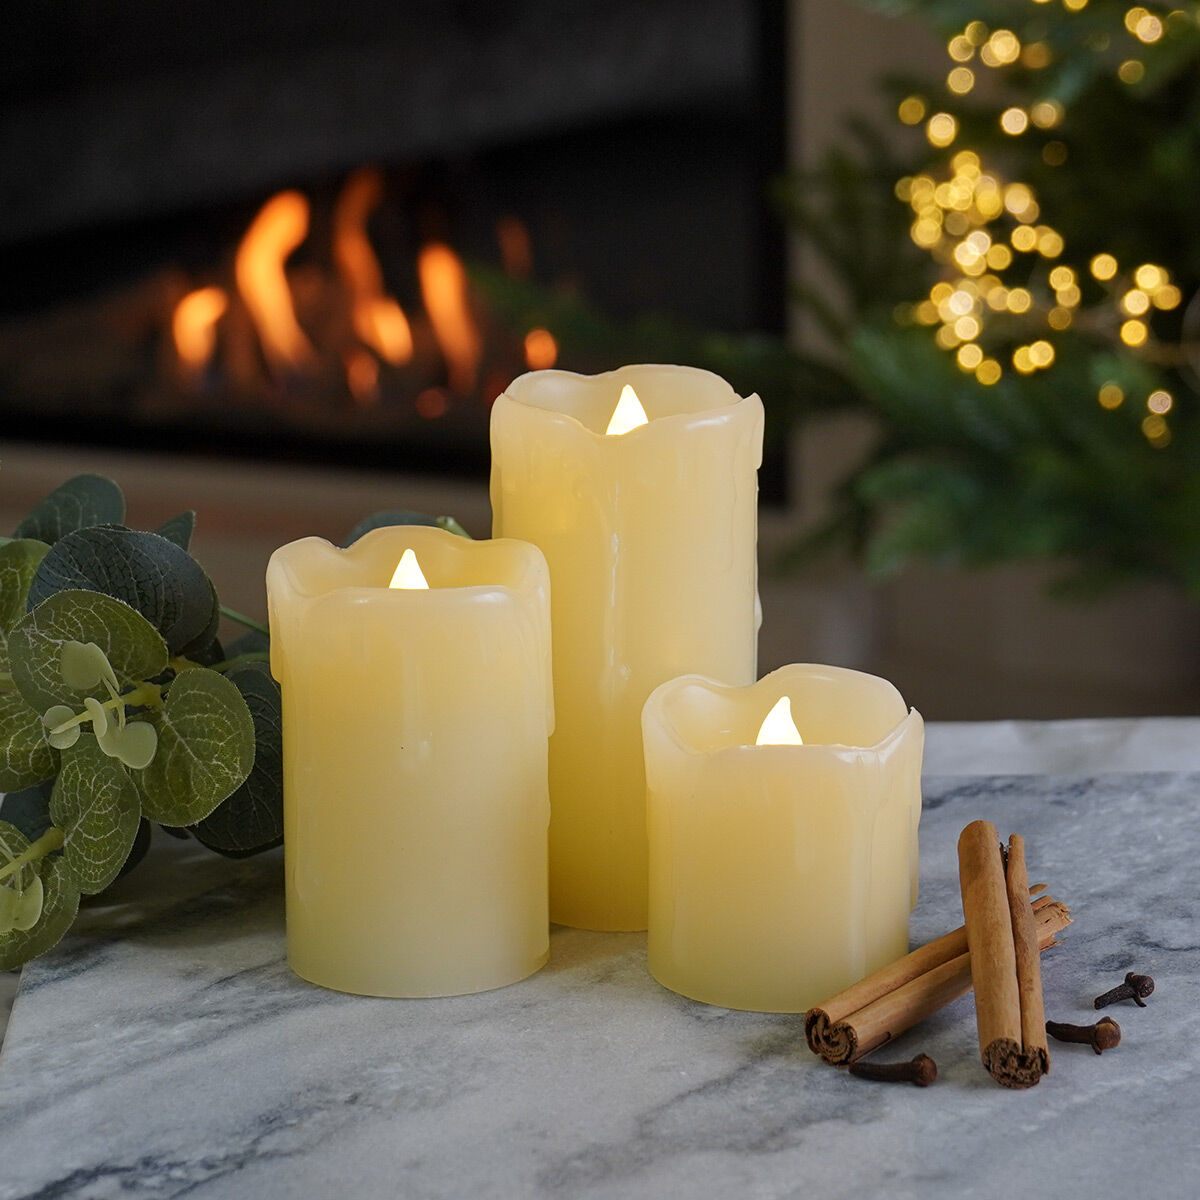 3 Battery Operated Flickering Wax Pillar LED Candles image 2